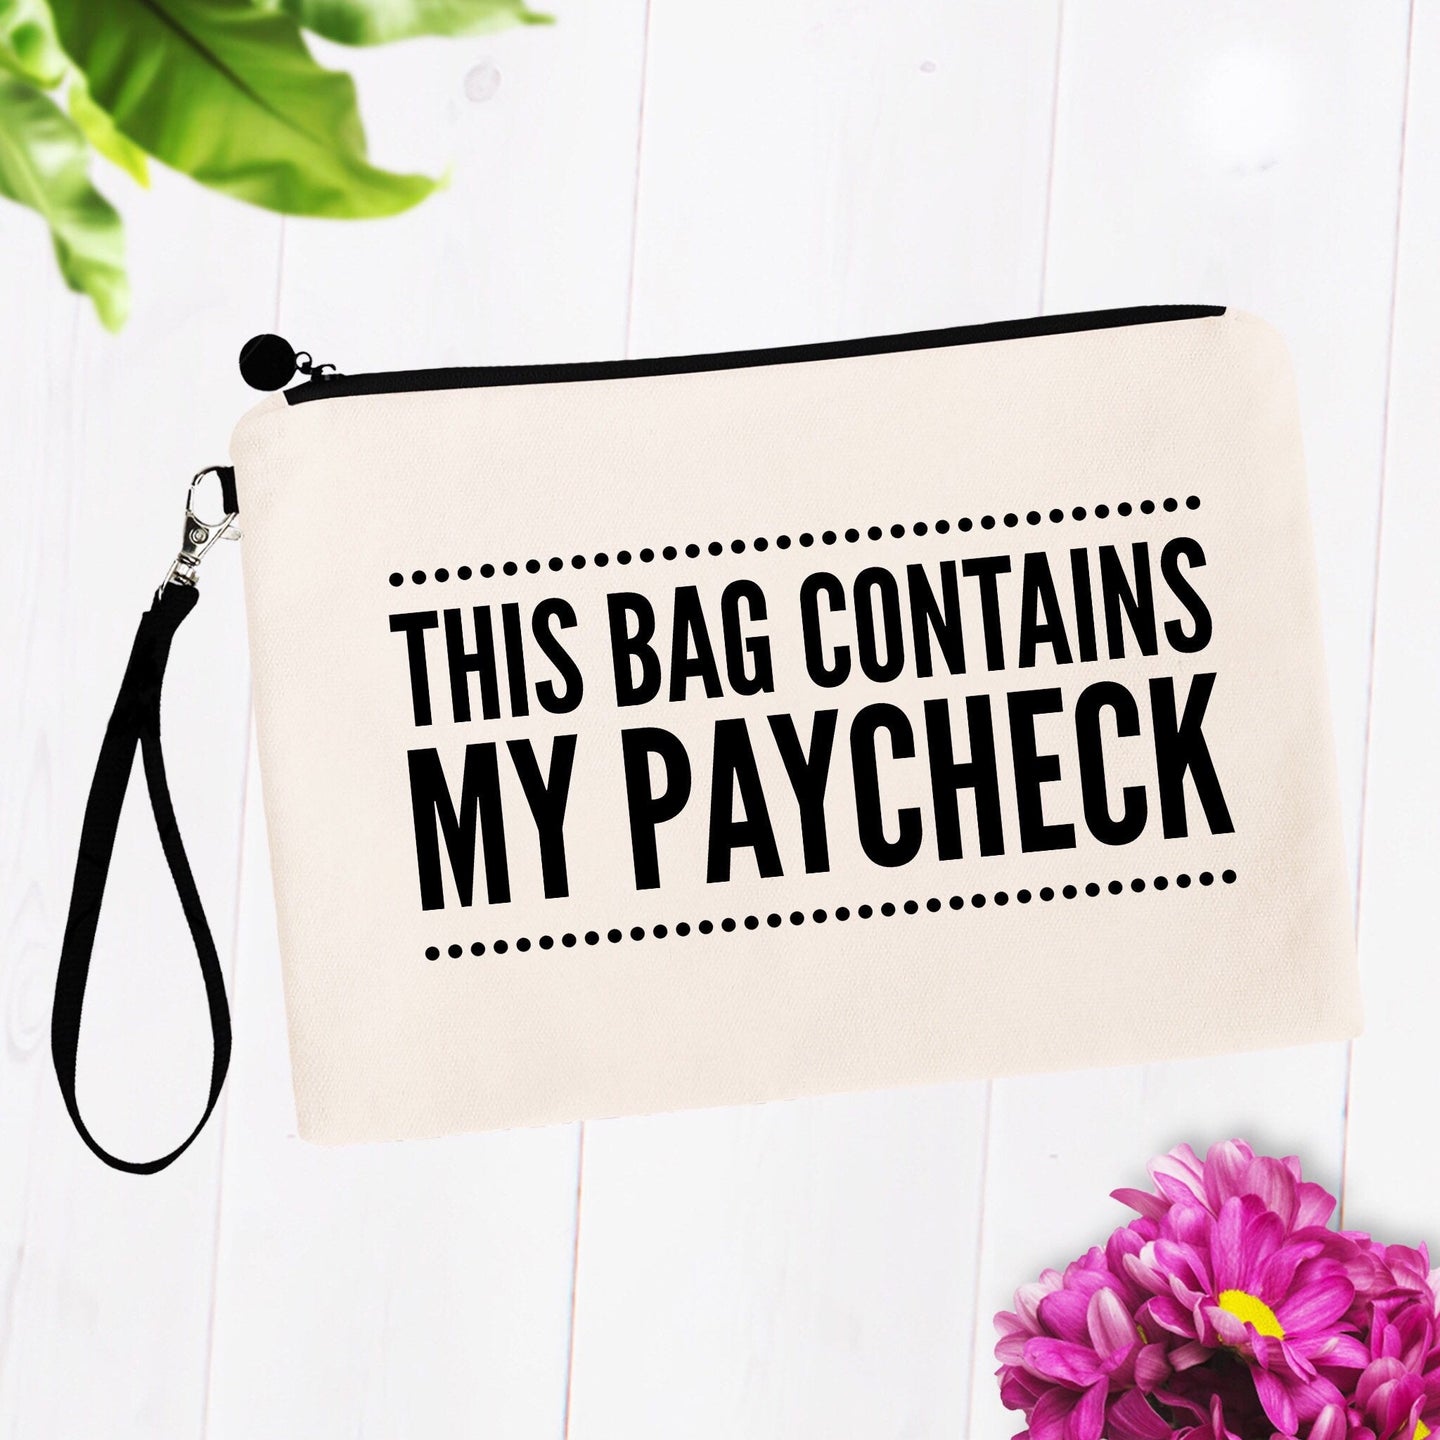 This Bag Contains my Paycheck